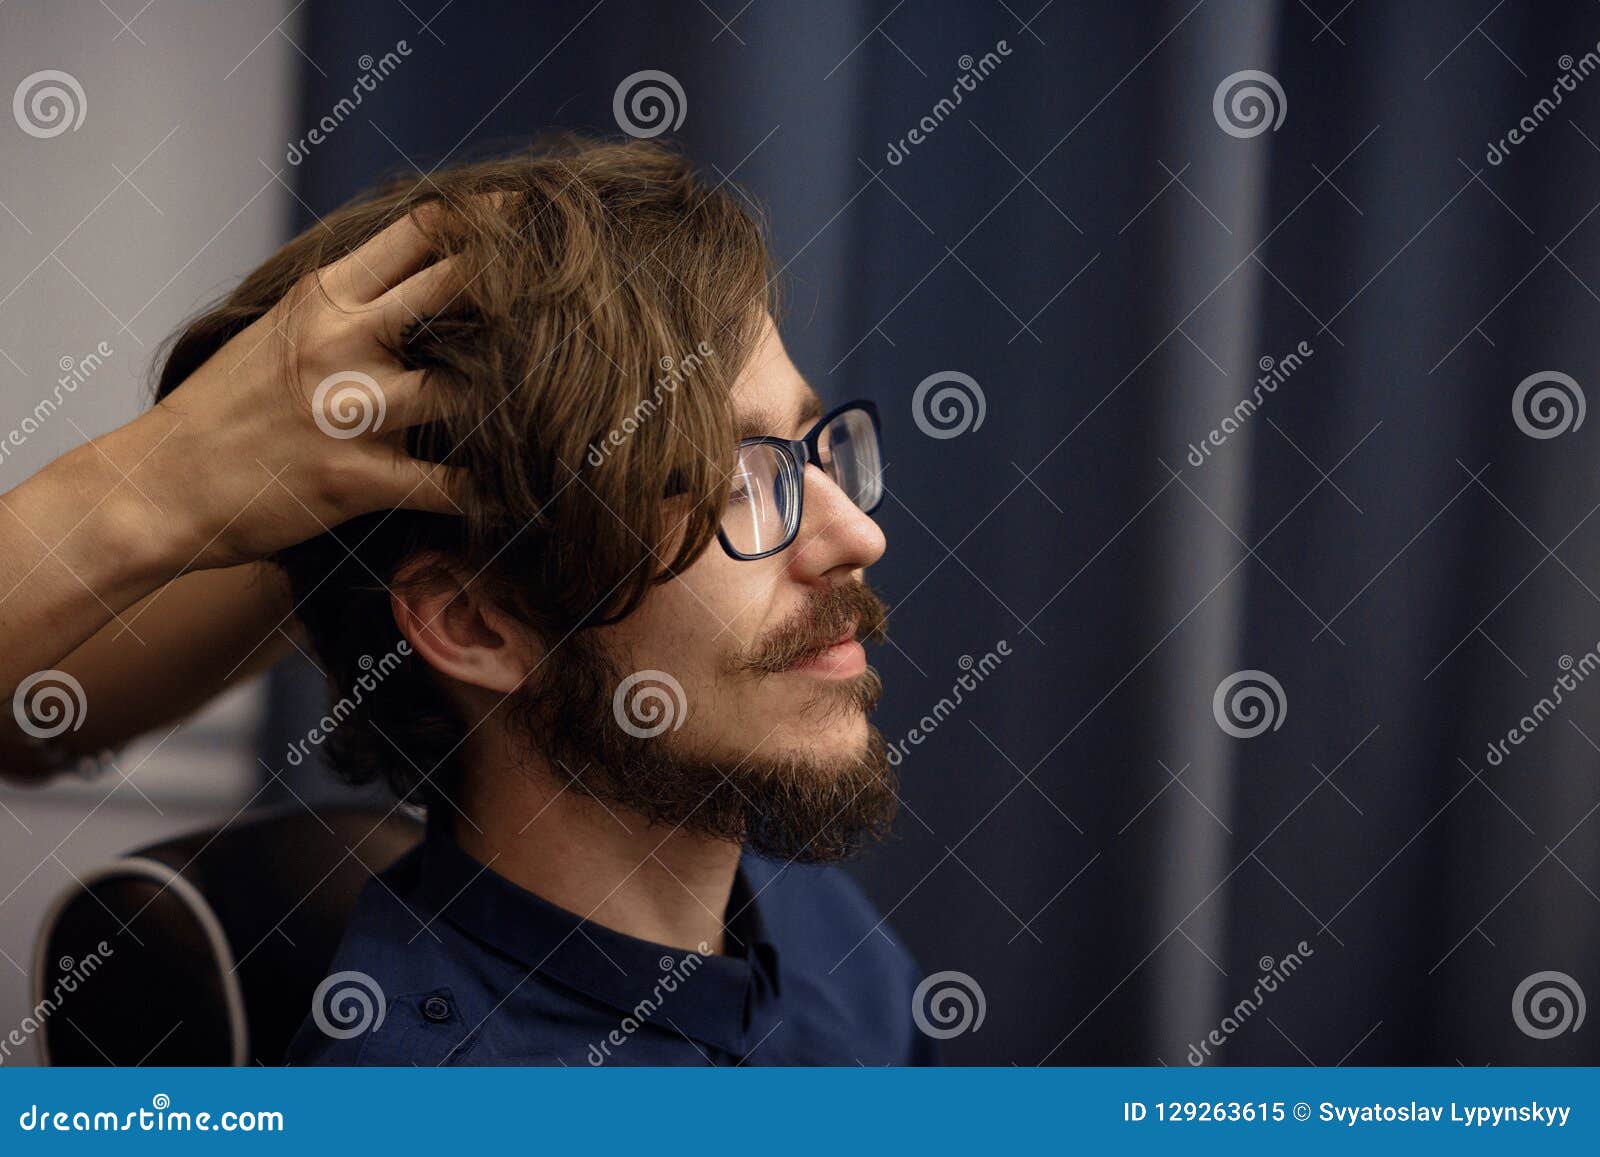 Guy doing a head massage stock image. Image of treatment - 129263615